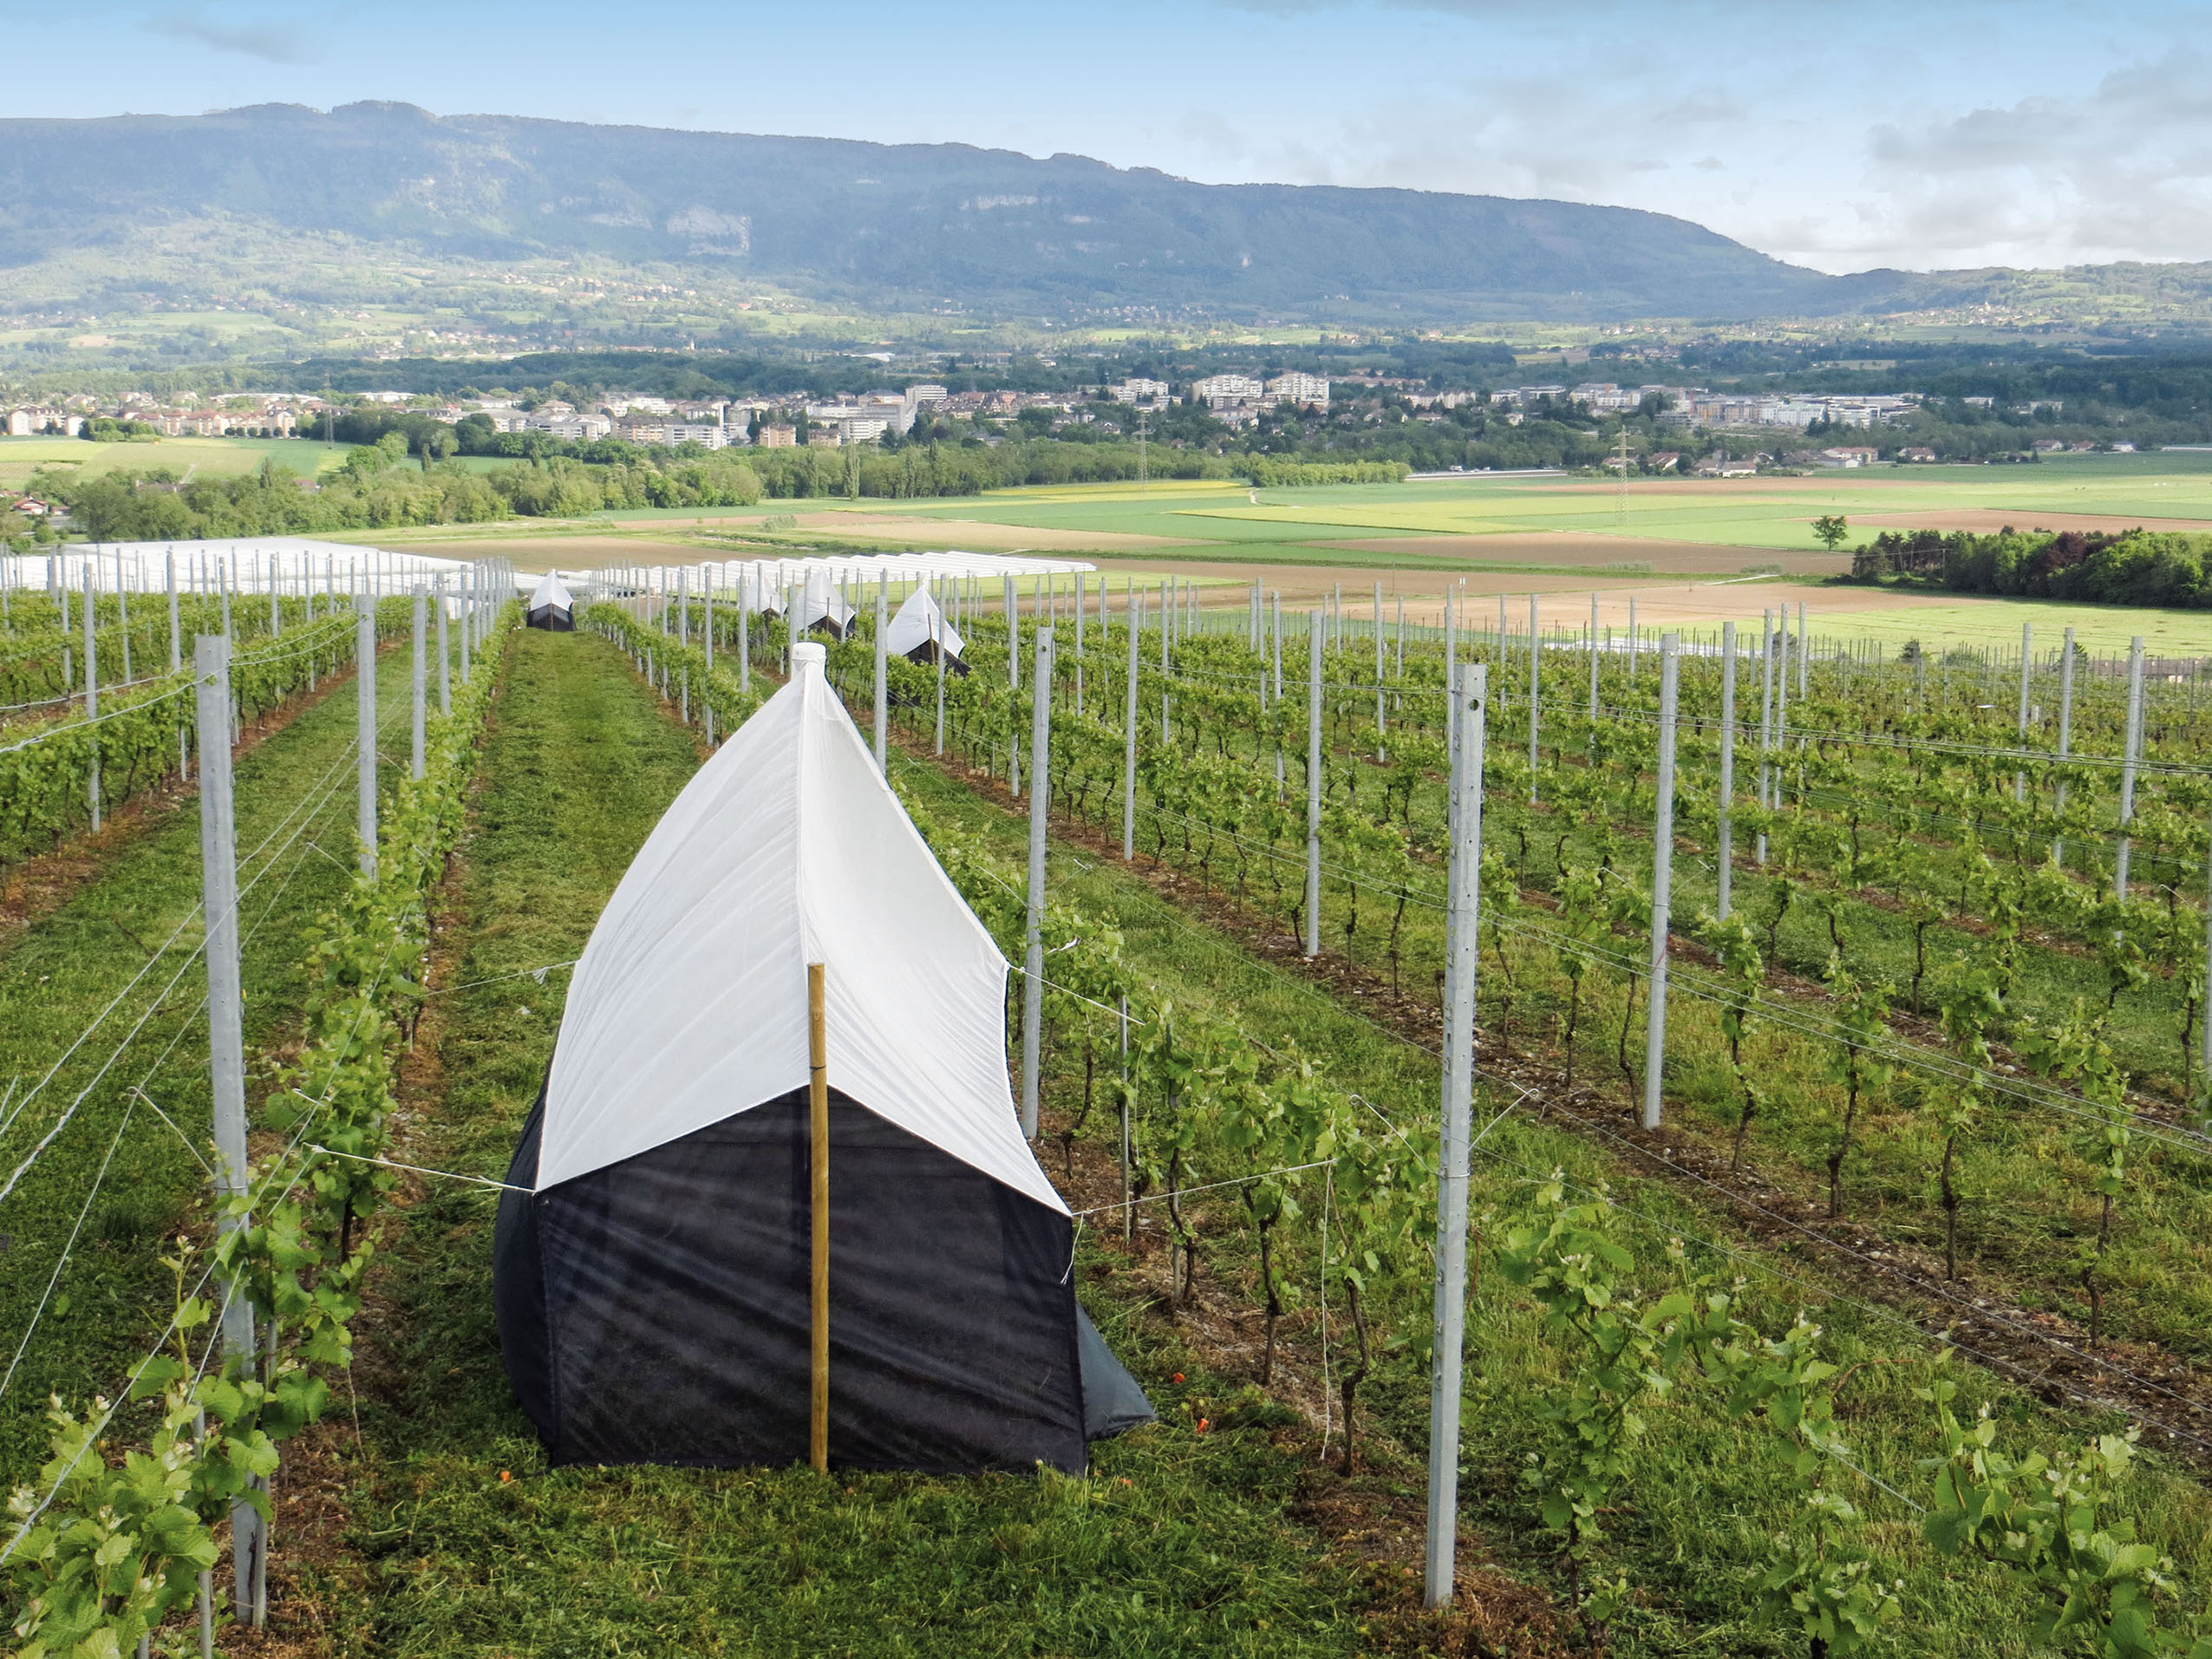 Proposal for a protocol for vegetation monitoring in vineyards and orchards